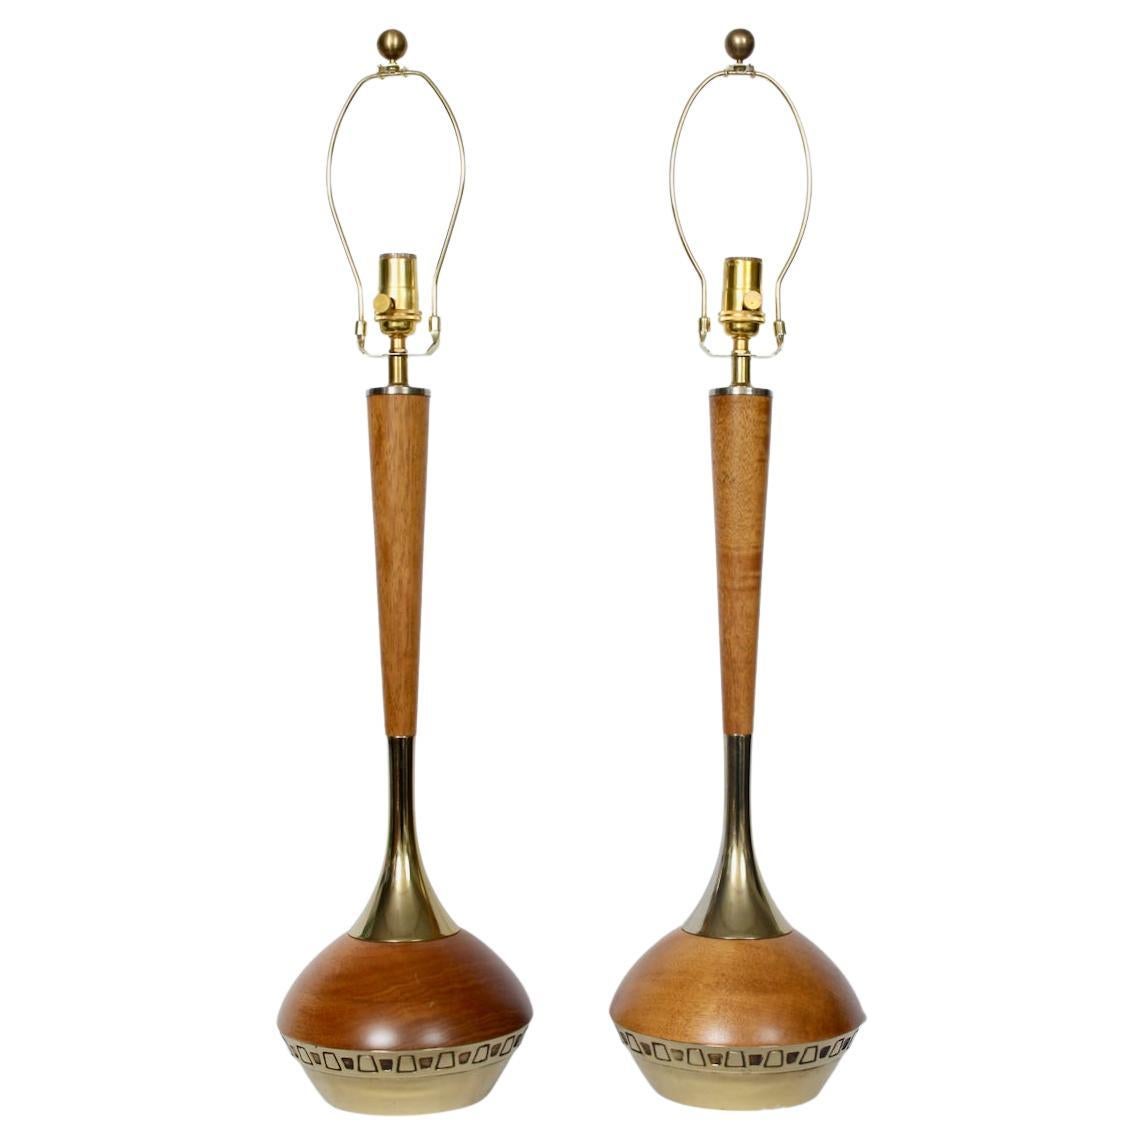 Tall Pair Laurel Lamp Co. Tony Paul Style Teak & Brass Table Lamps, 1960s For Sale